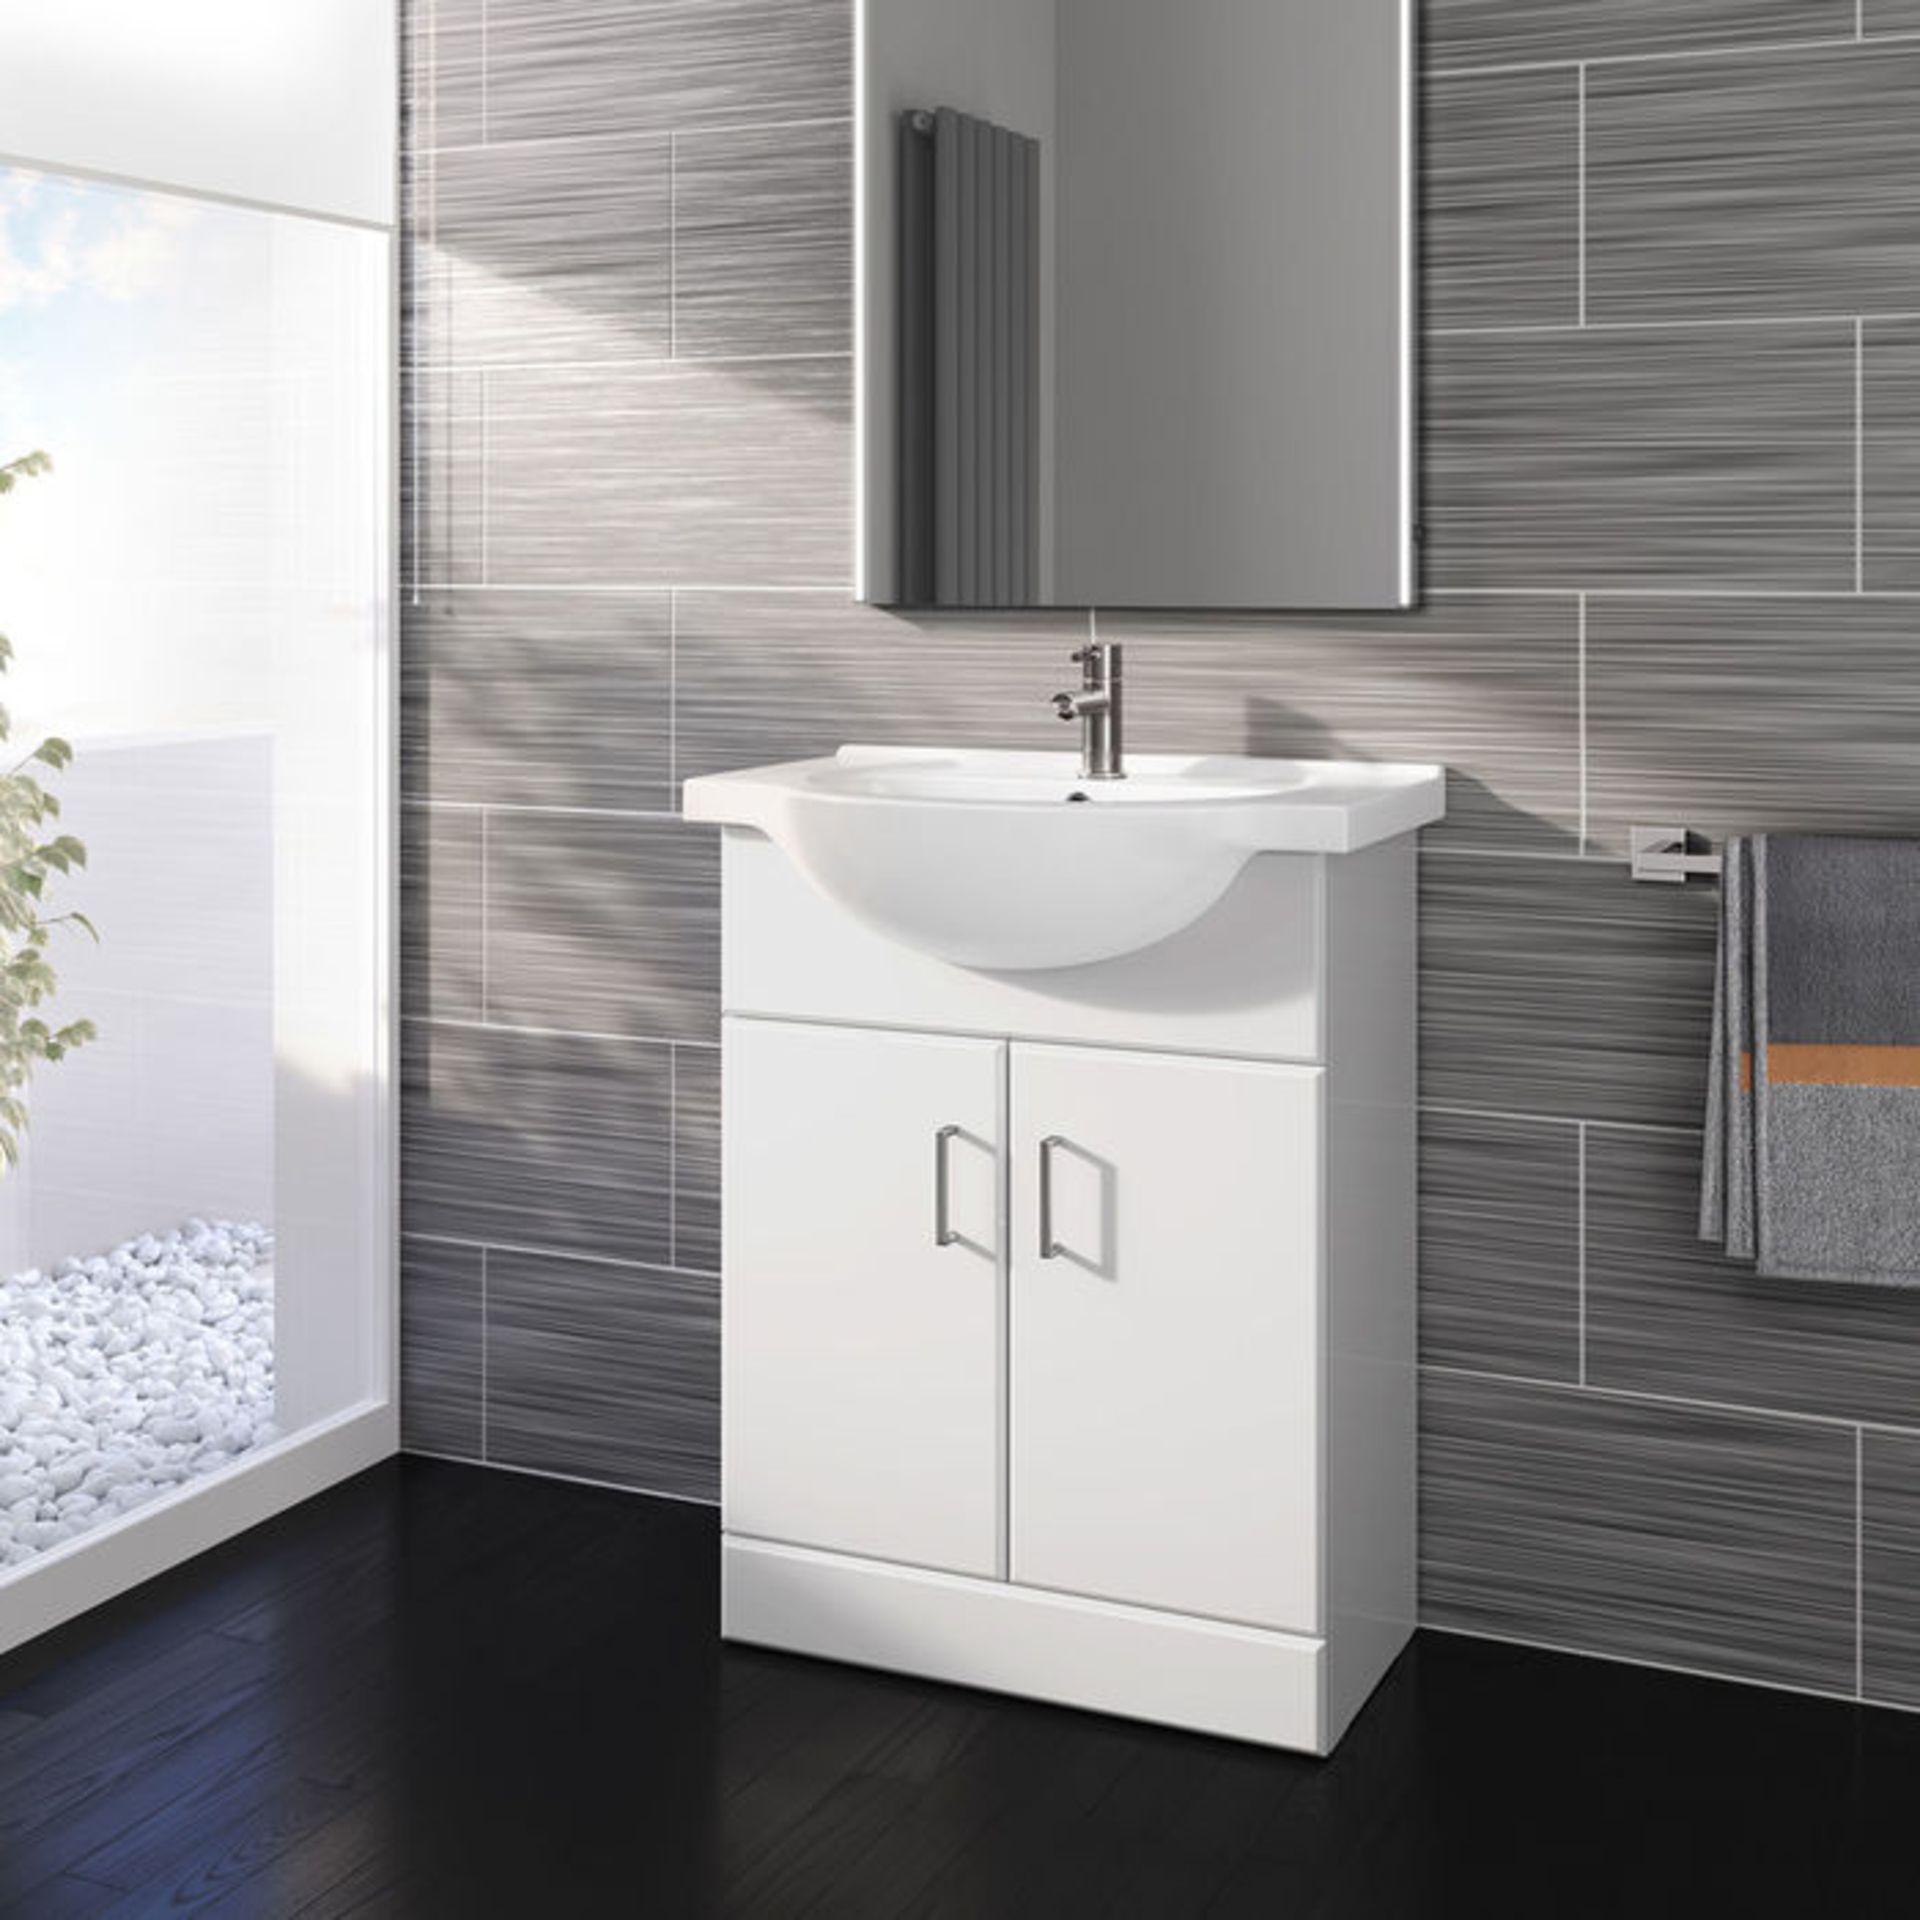 (Q93) 650x435mm Quartz Gloss White Built In Basin Cabinet. RRP £399.99. comes complete with basin. - Image 3 of 5